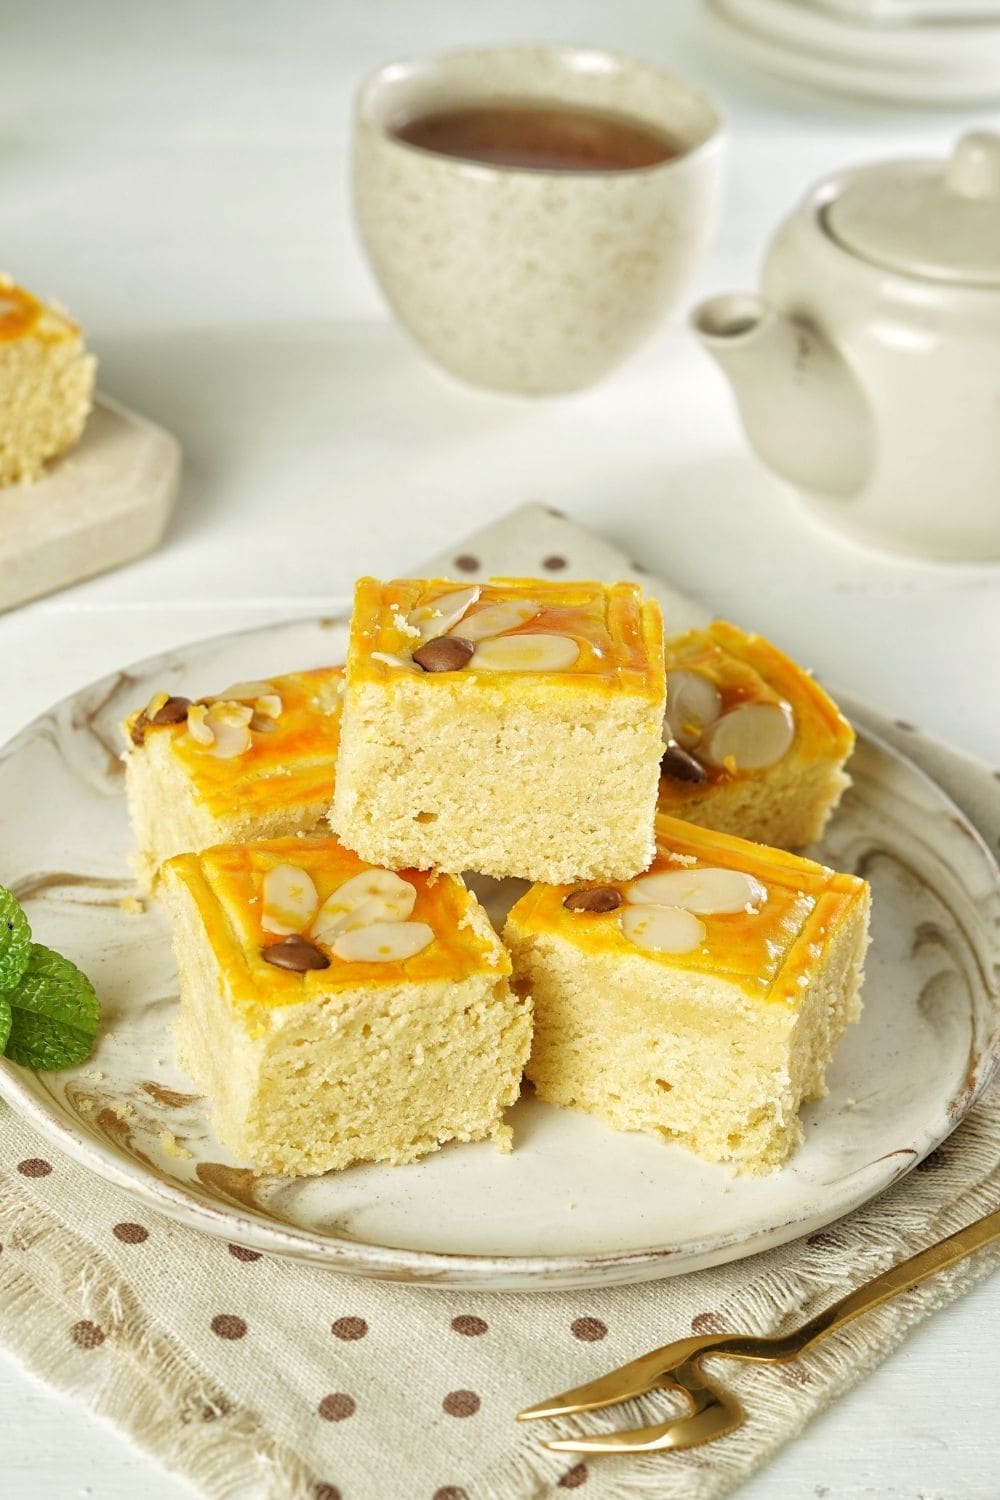 Sweet Butter Cake with Almonds and Coffee